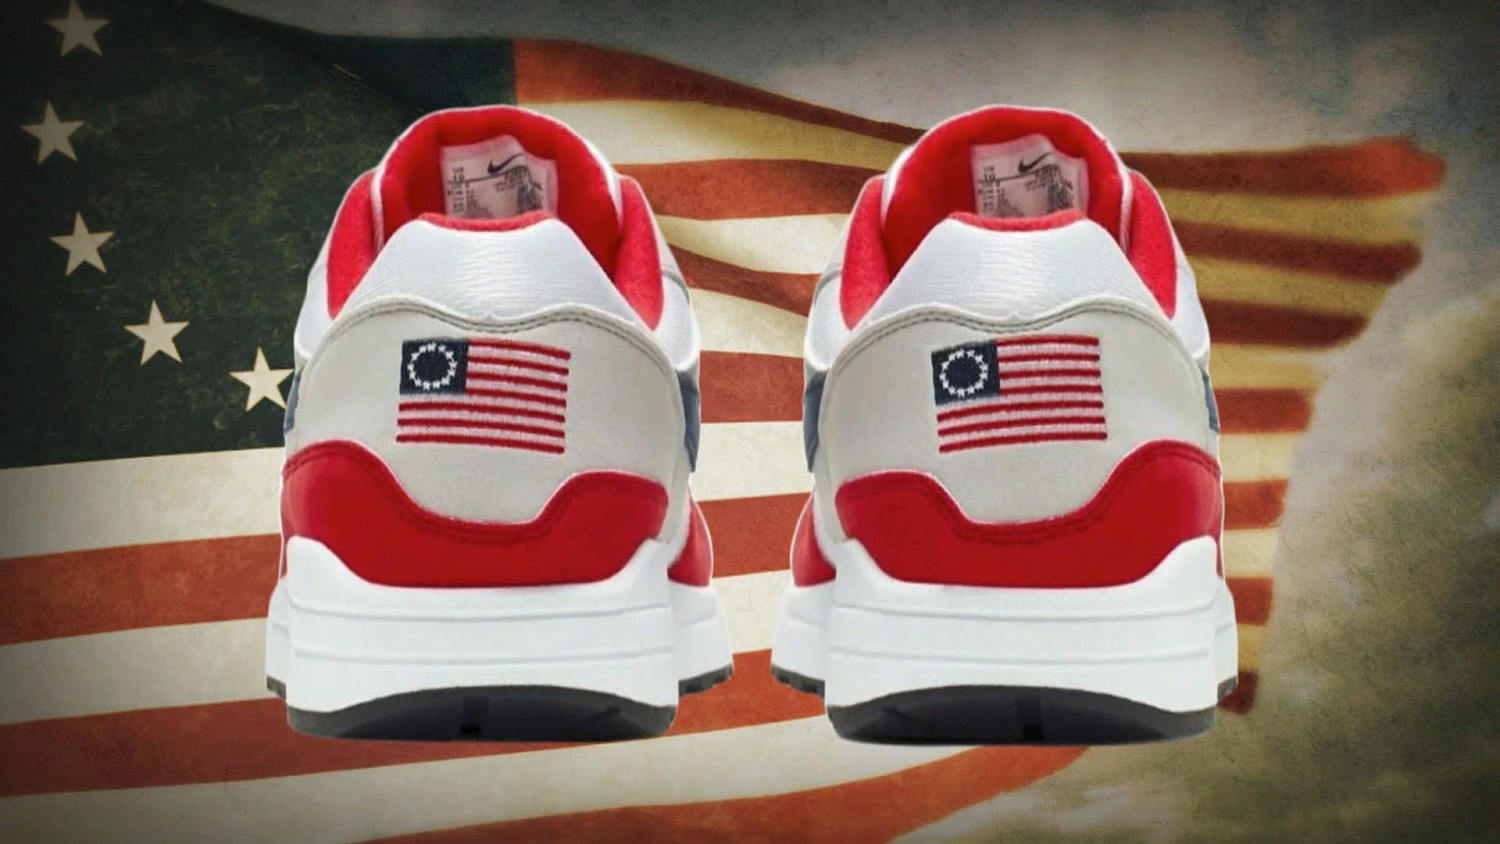 Nike pulls flag sneakers after